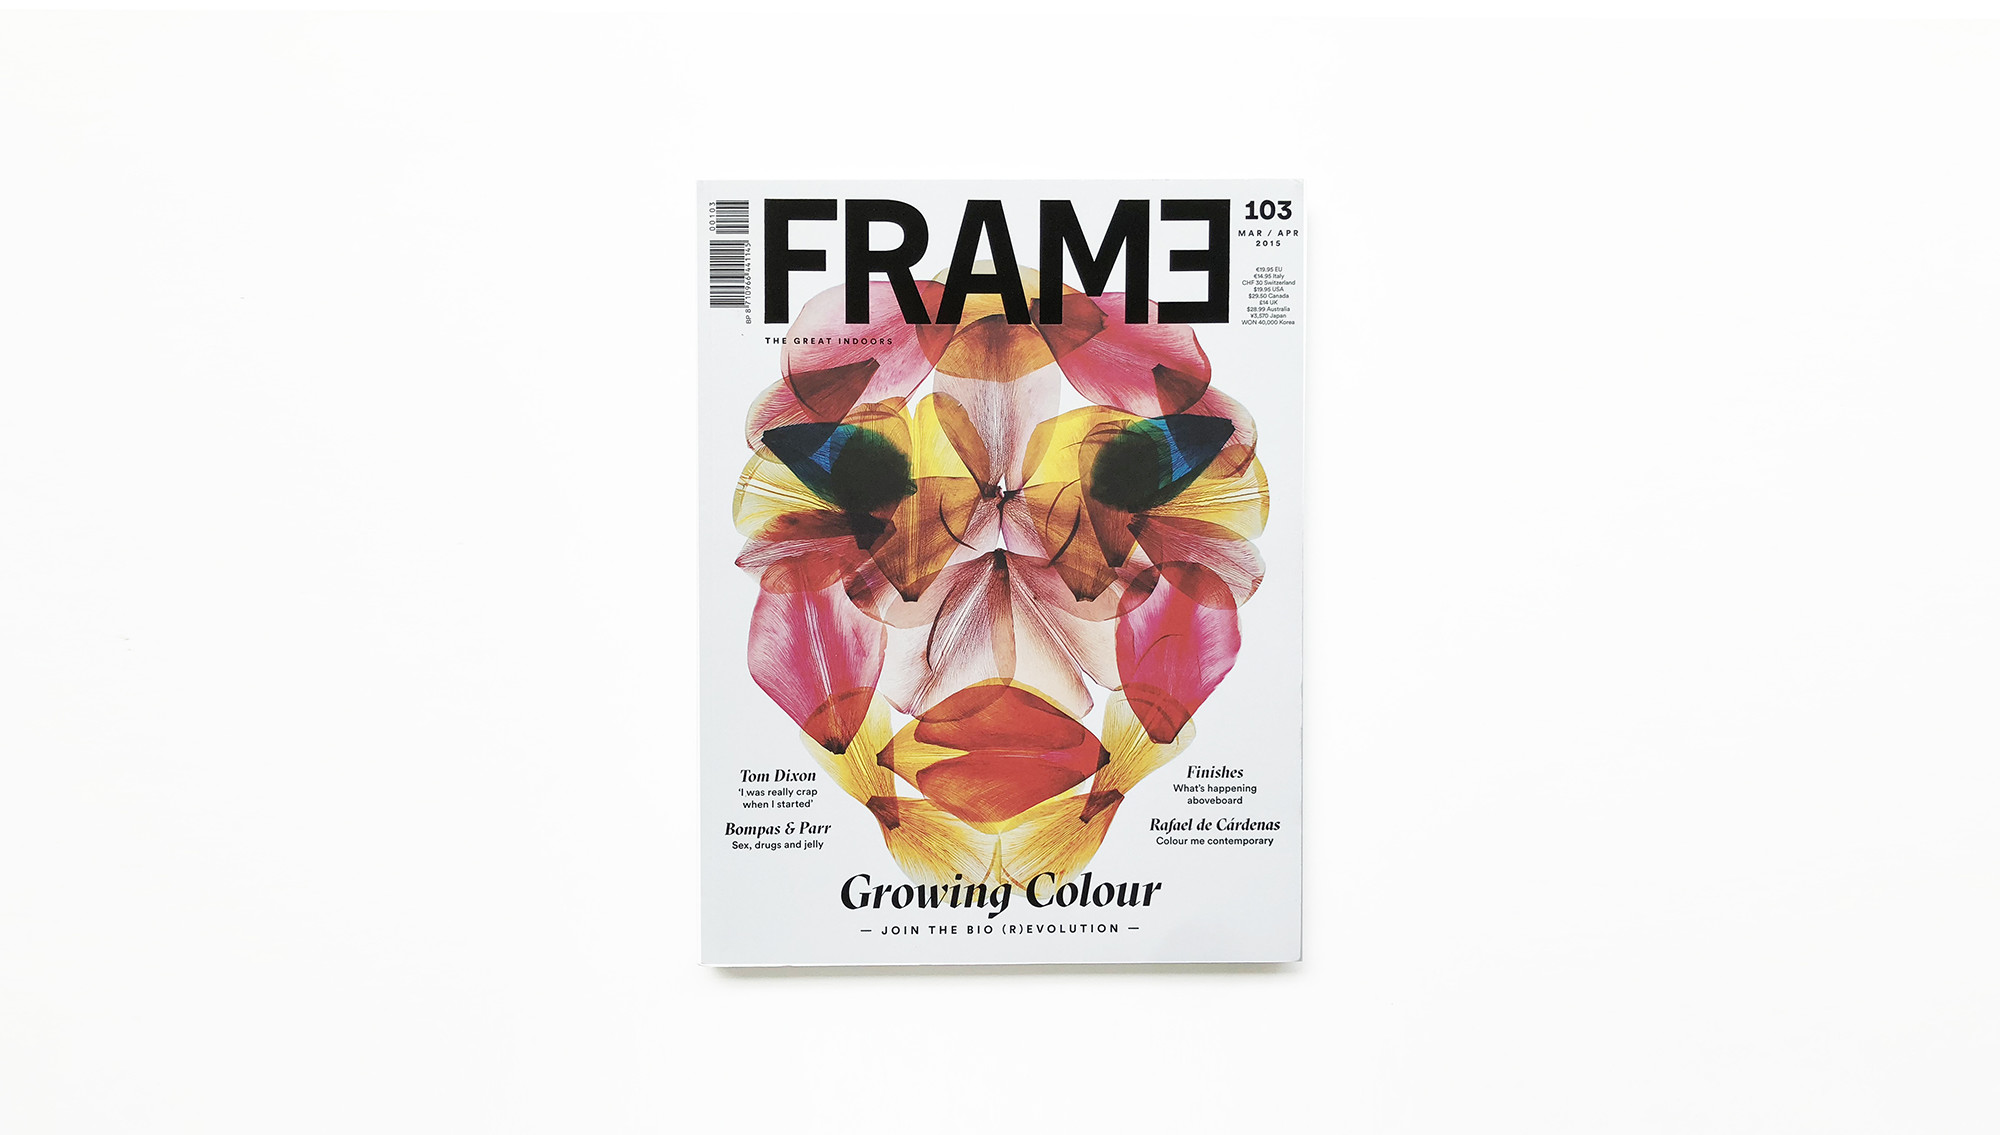 FRAME March / 2015